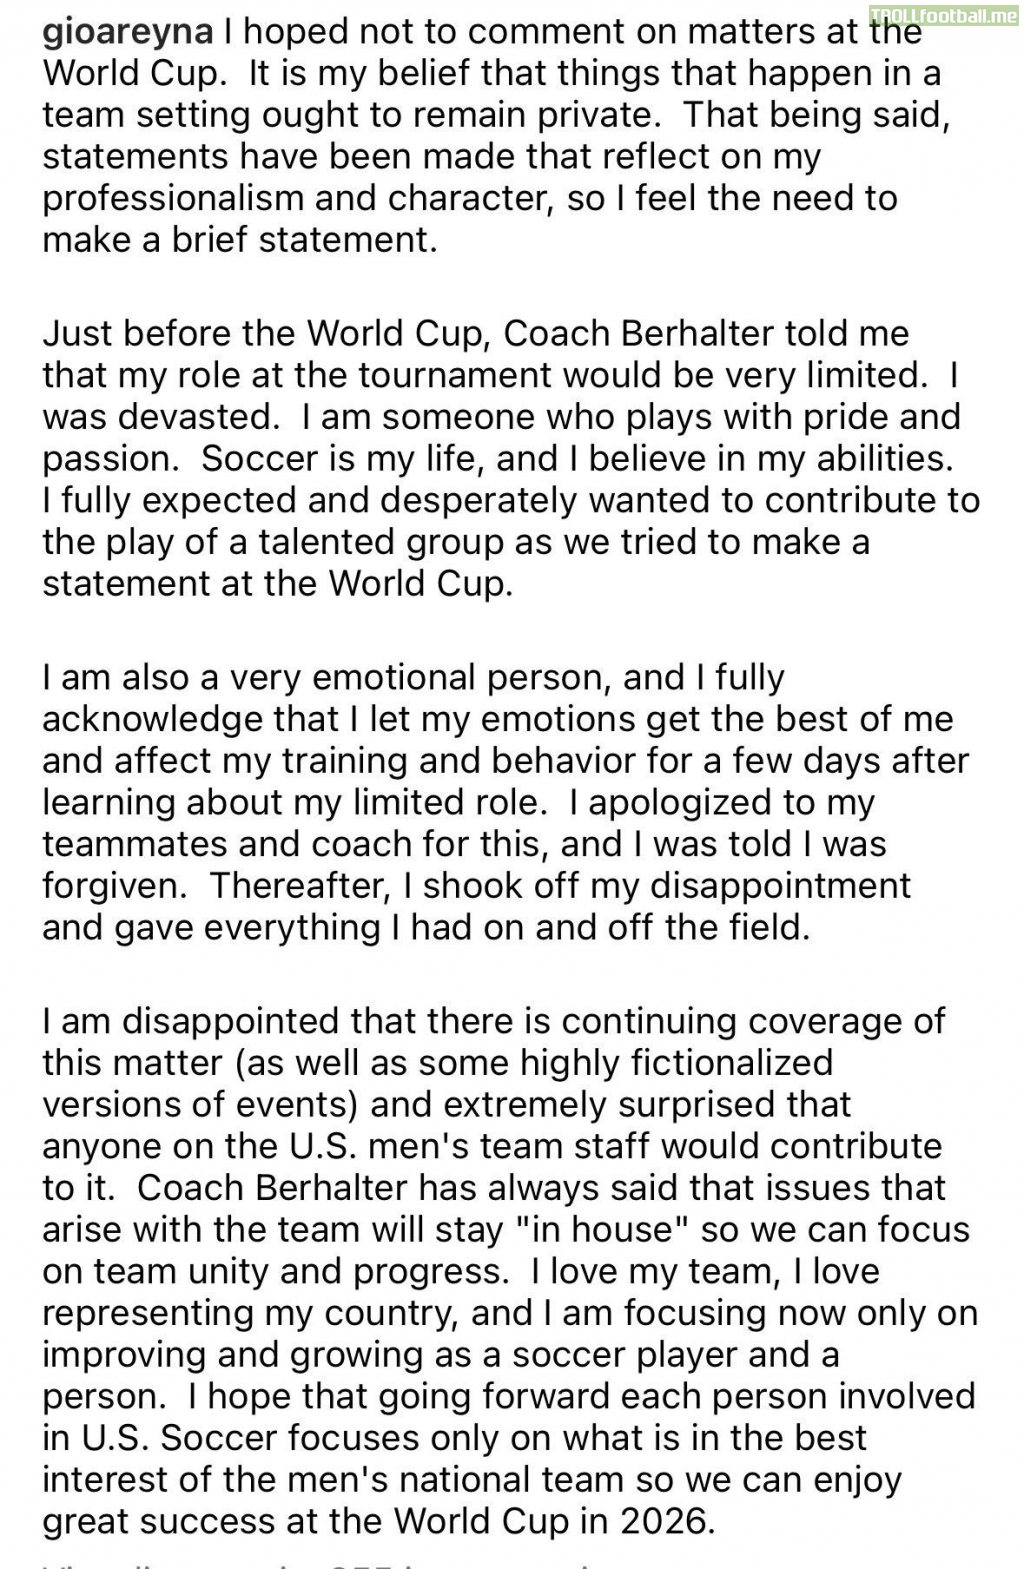 Gio Reyna admits his faults during the World Cup: “I fully acknowledge that I letemotions get the best of me, affect my training and behavior for a few days after learning about my limited role”. “I apologized to my teammates and coach for this, and I was told I was forgiven”.